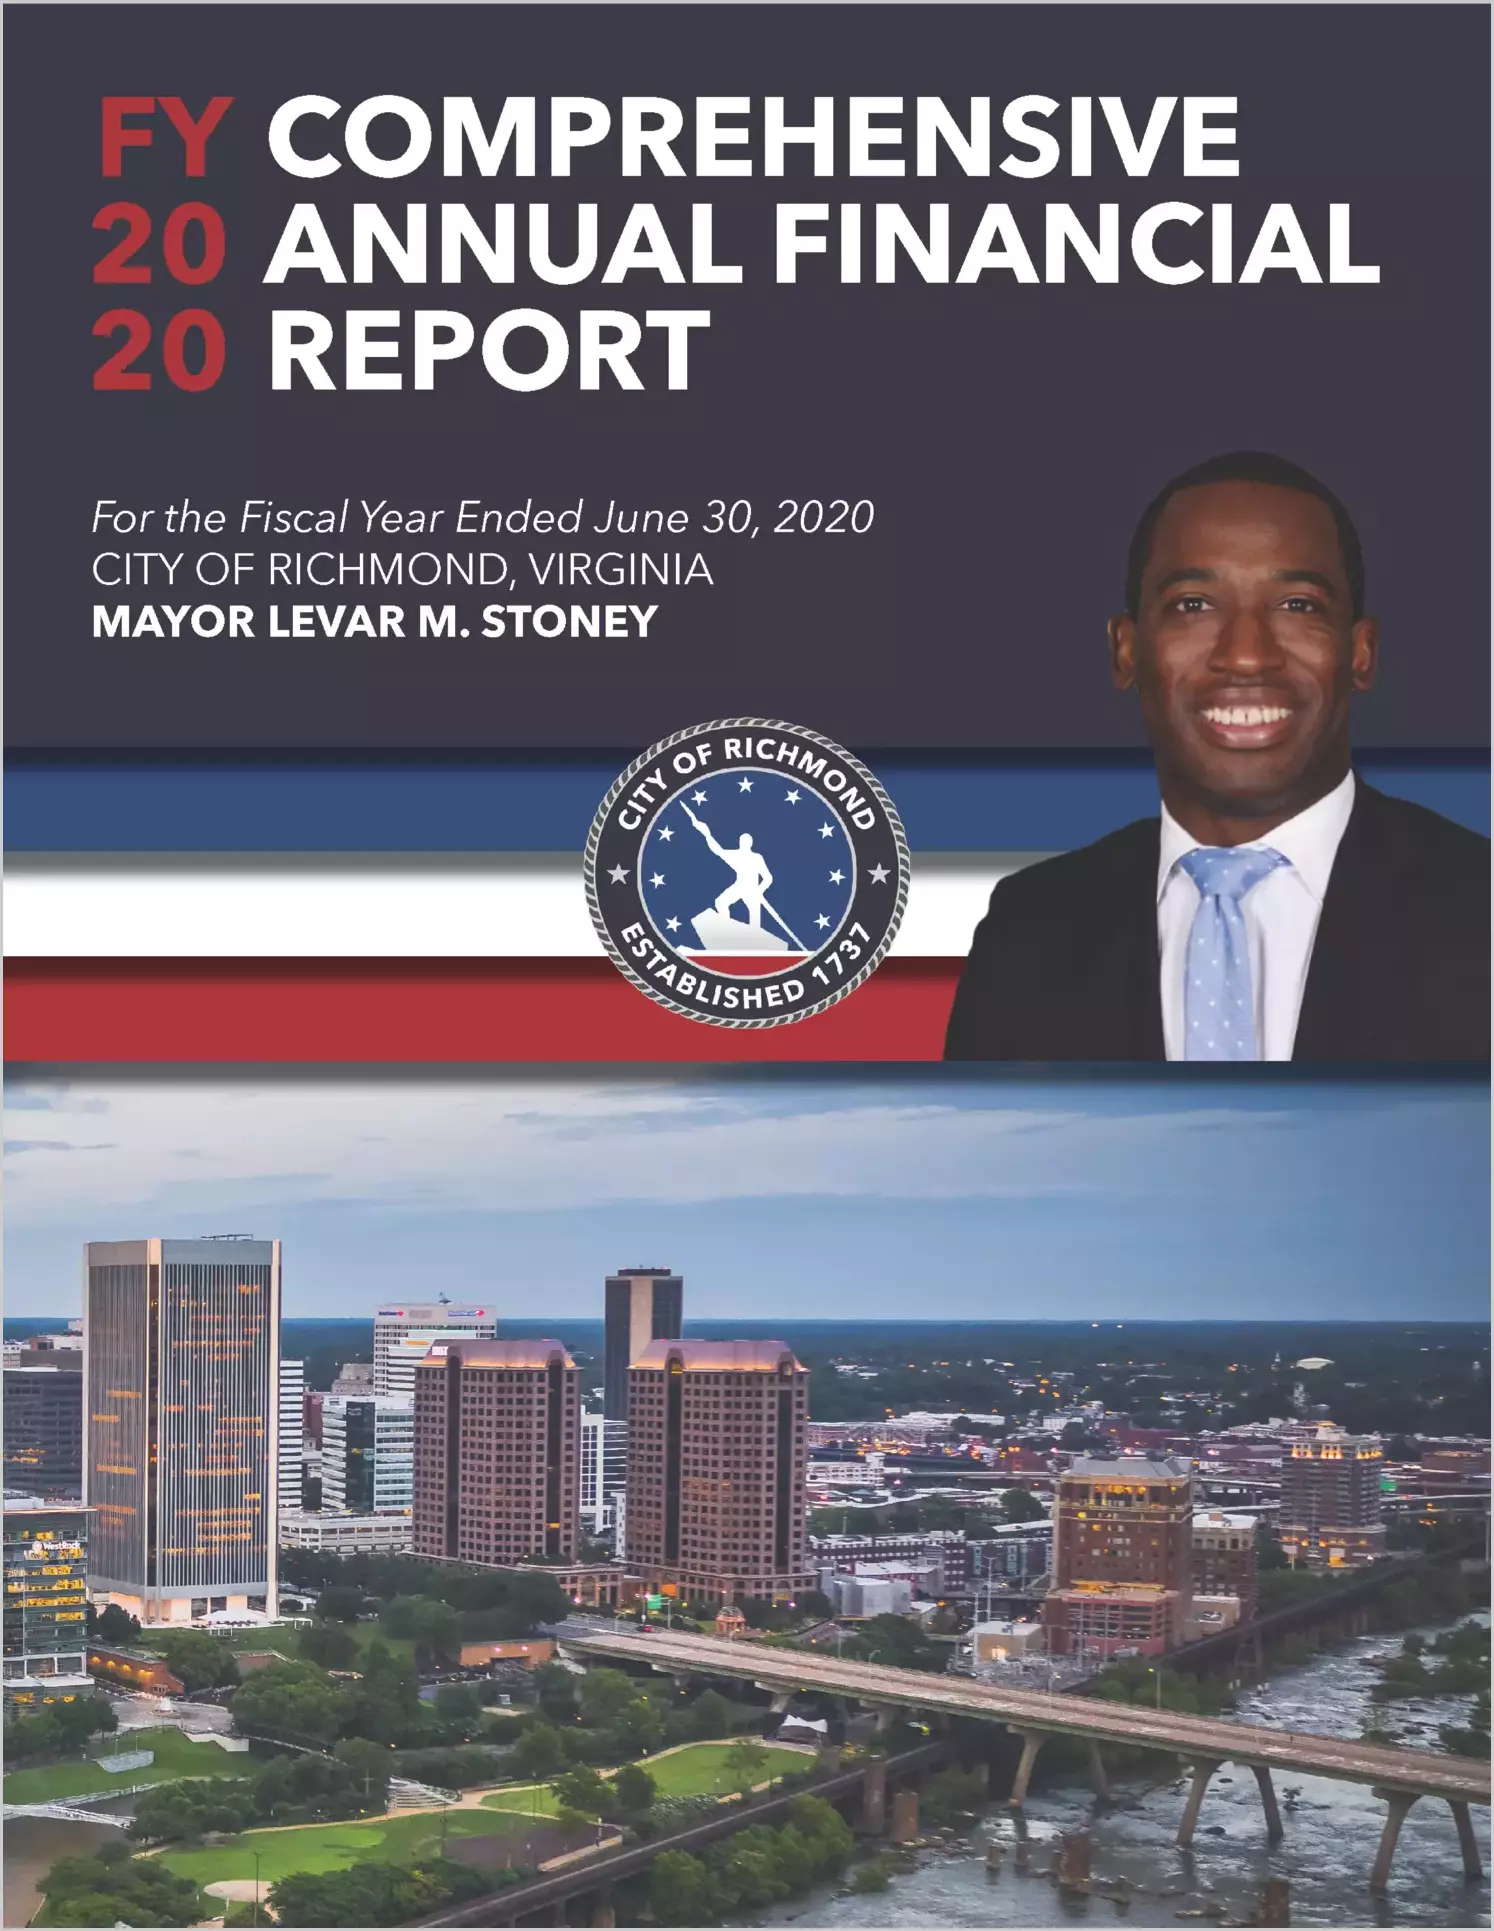 2020 Annual Financial Report for City of Richmond